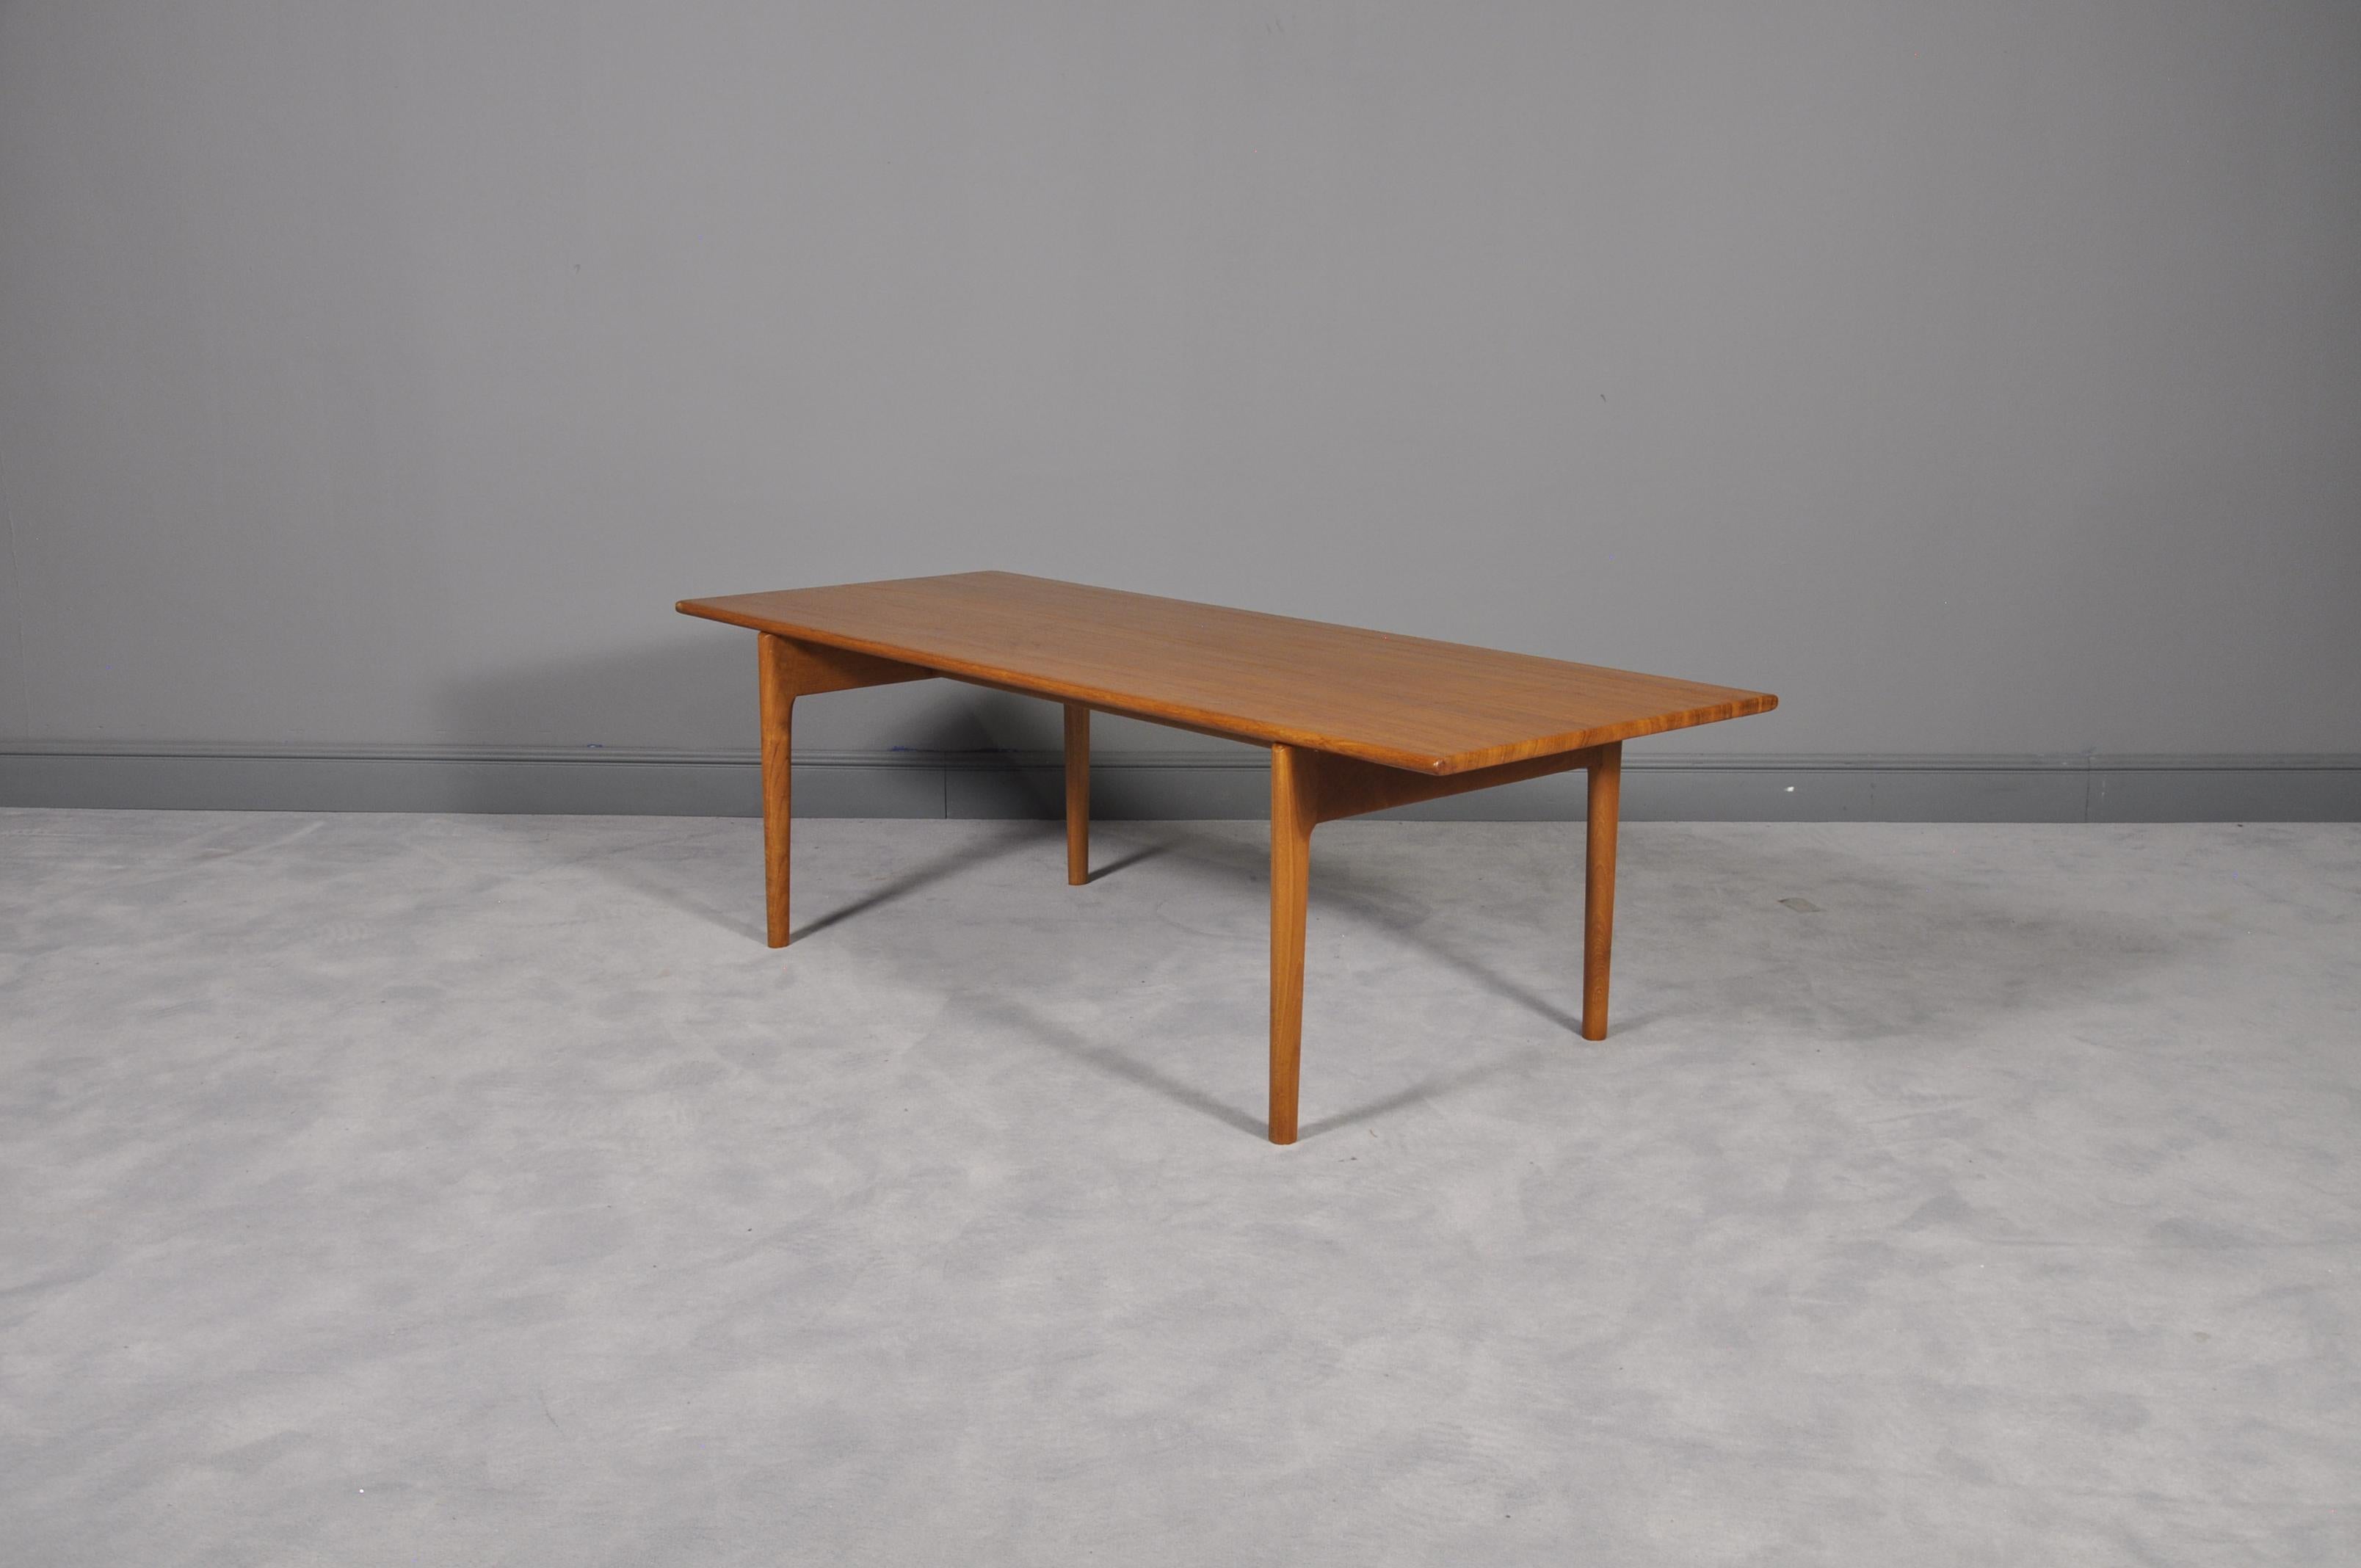 Beautiful Andreas Tuck midcentury coffee table features the wonderful design of Hans J. Wegner. Complete with trademark signed, and makers stamp this piece makes a great addition to home or business. Made of teak and in good condition with some wear